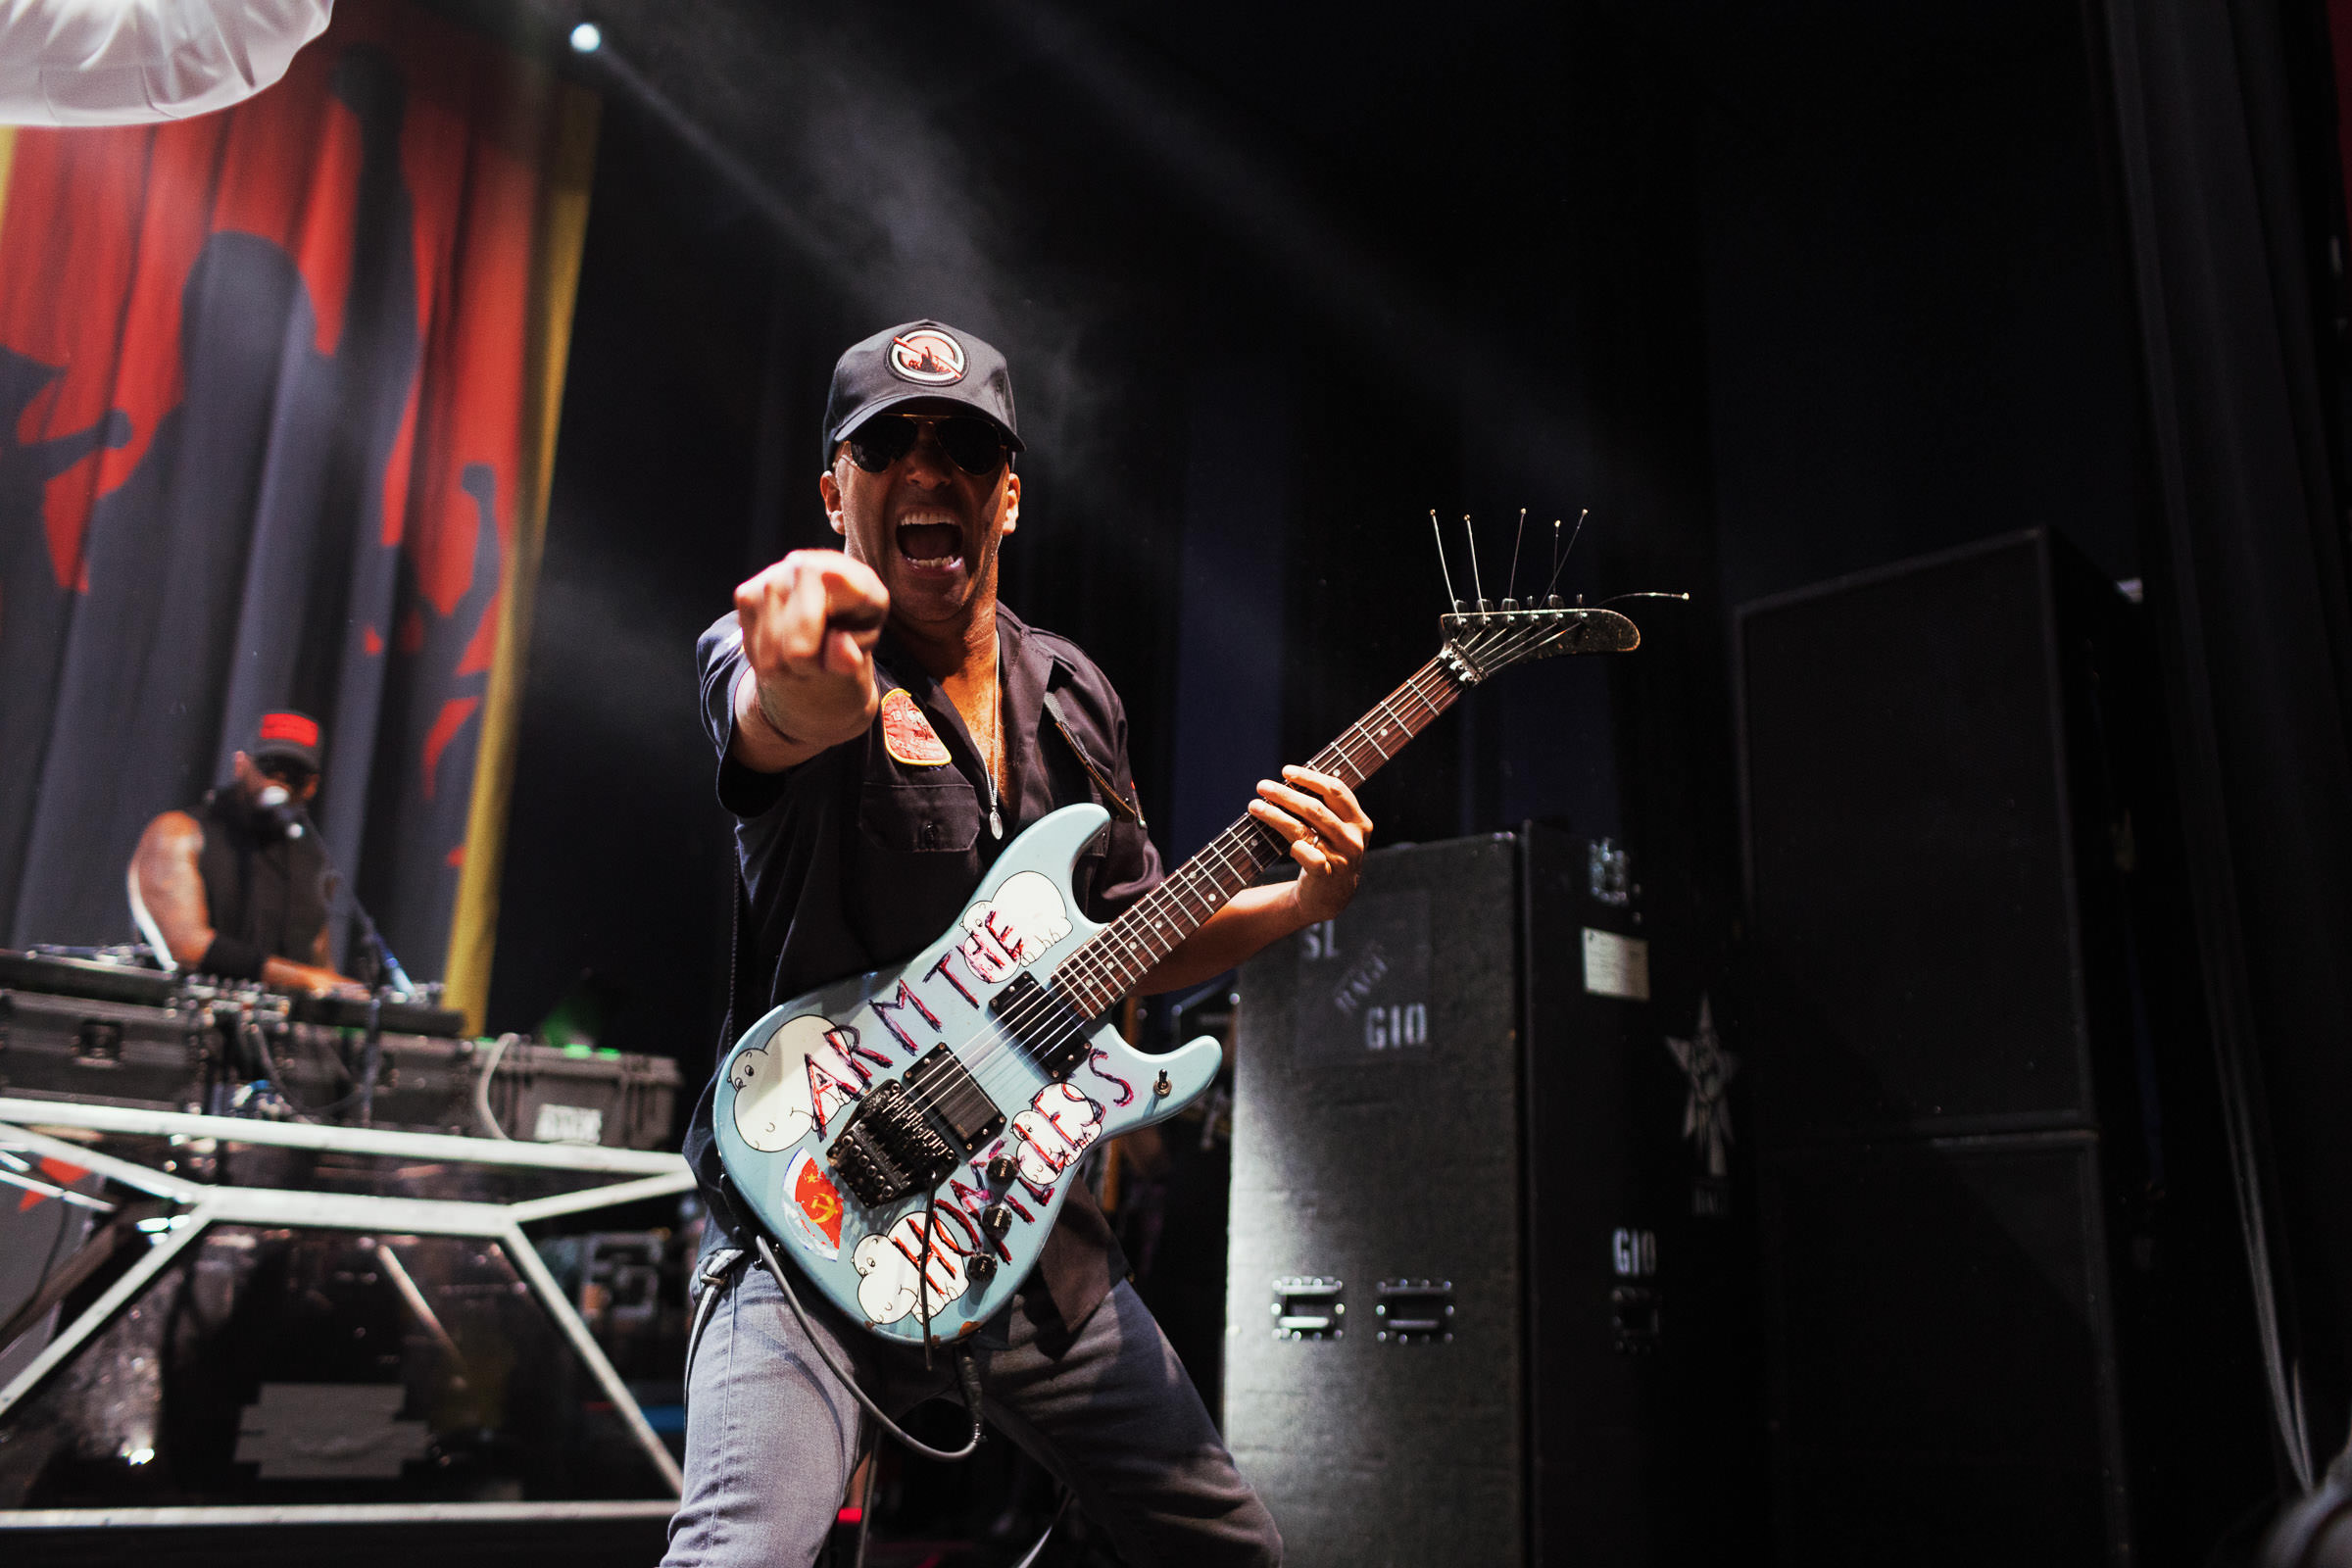 Tom Morello playing the Arm the Homeless guitar with Prophets of Rage, and pointing at the photographer Tracy Morter of the Christmas campaign.